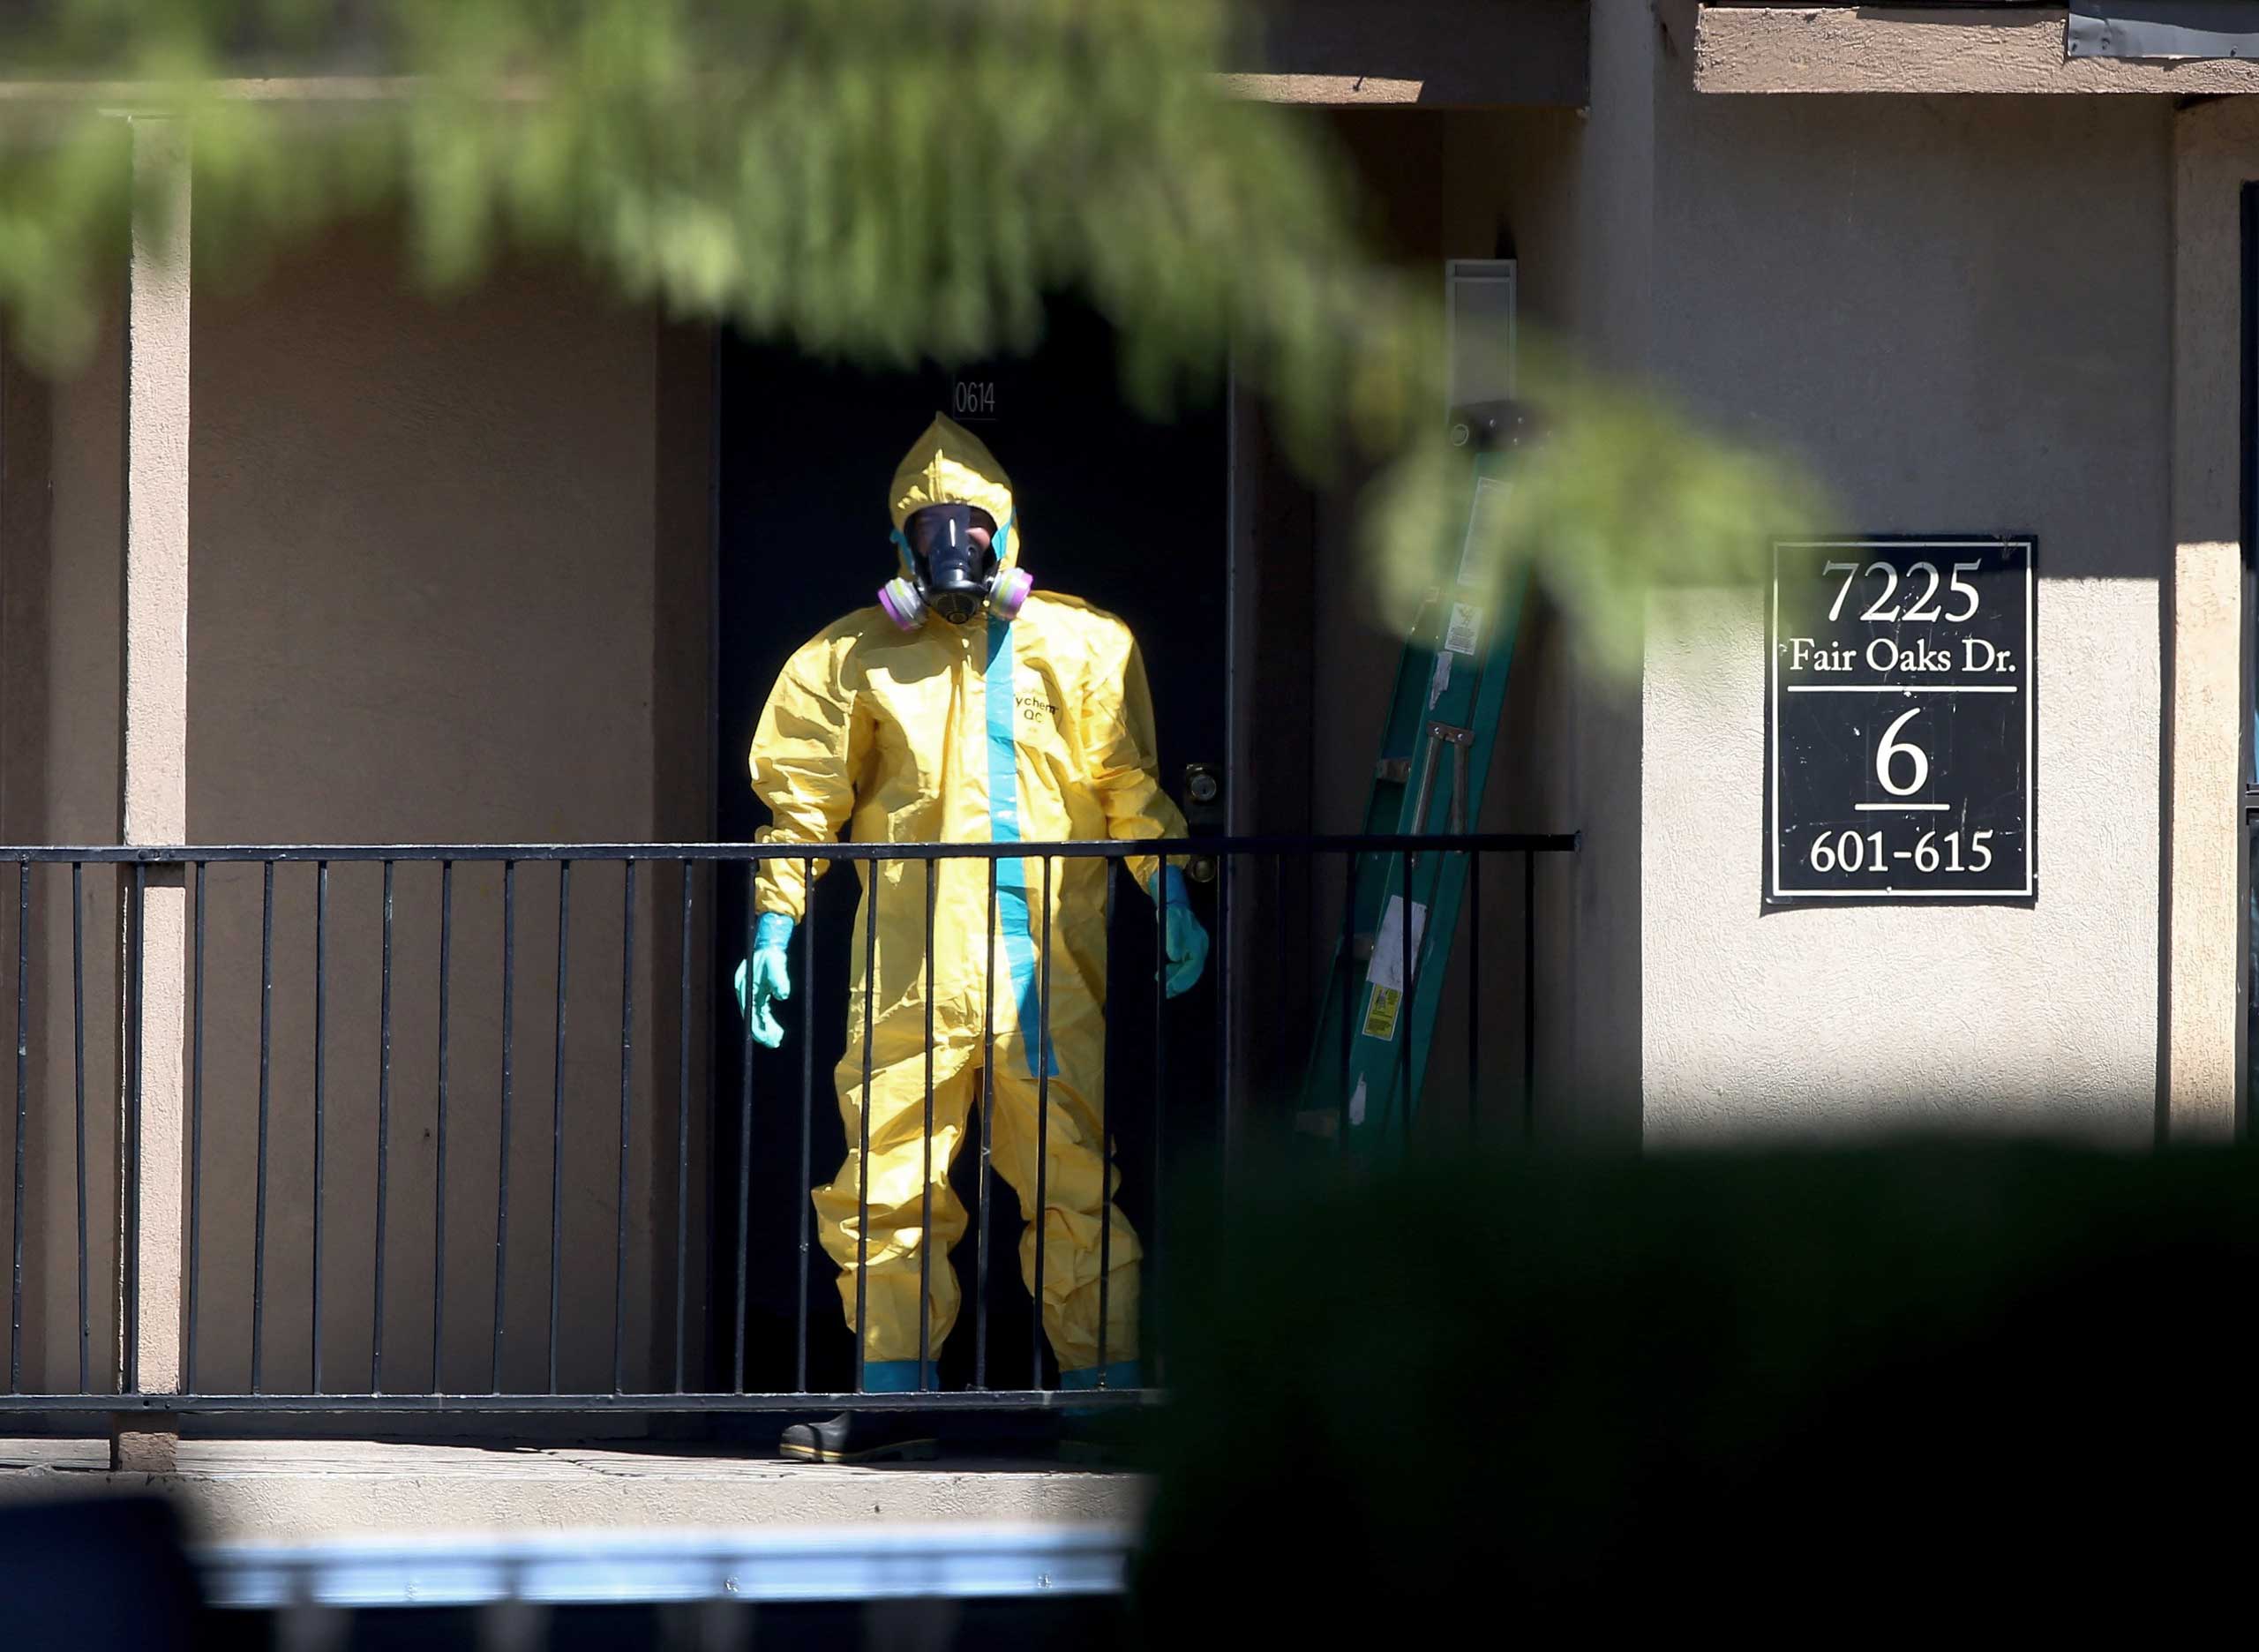 A hazmat team member arrives to clean a unit at the Ivy Apartments, where the confirmed Ebola virus patient was staying, on Oct. 3, 2014 in Dallas, Texas. (Joe Raedle—Getty Images)